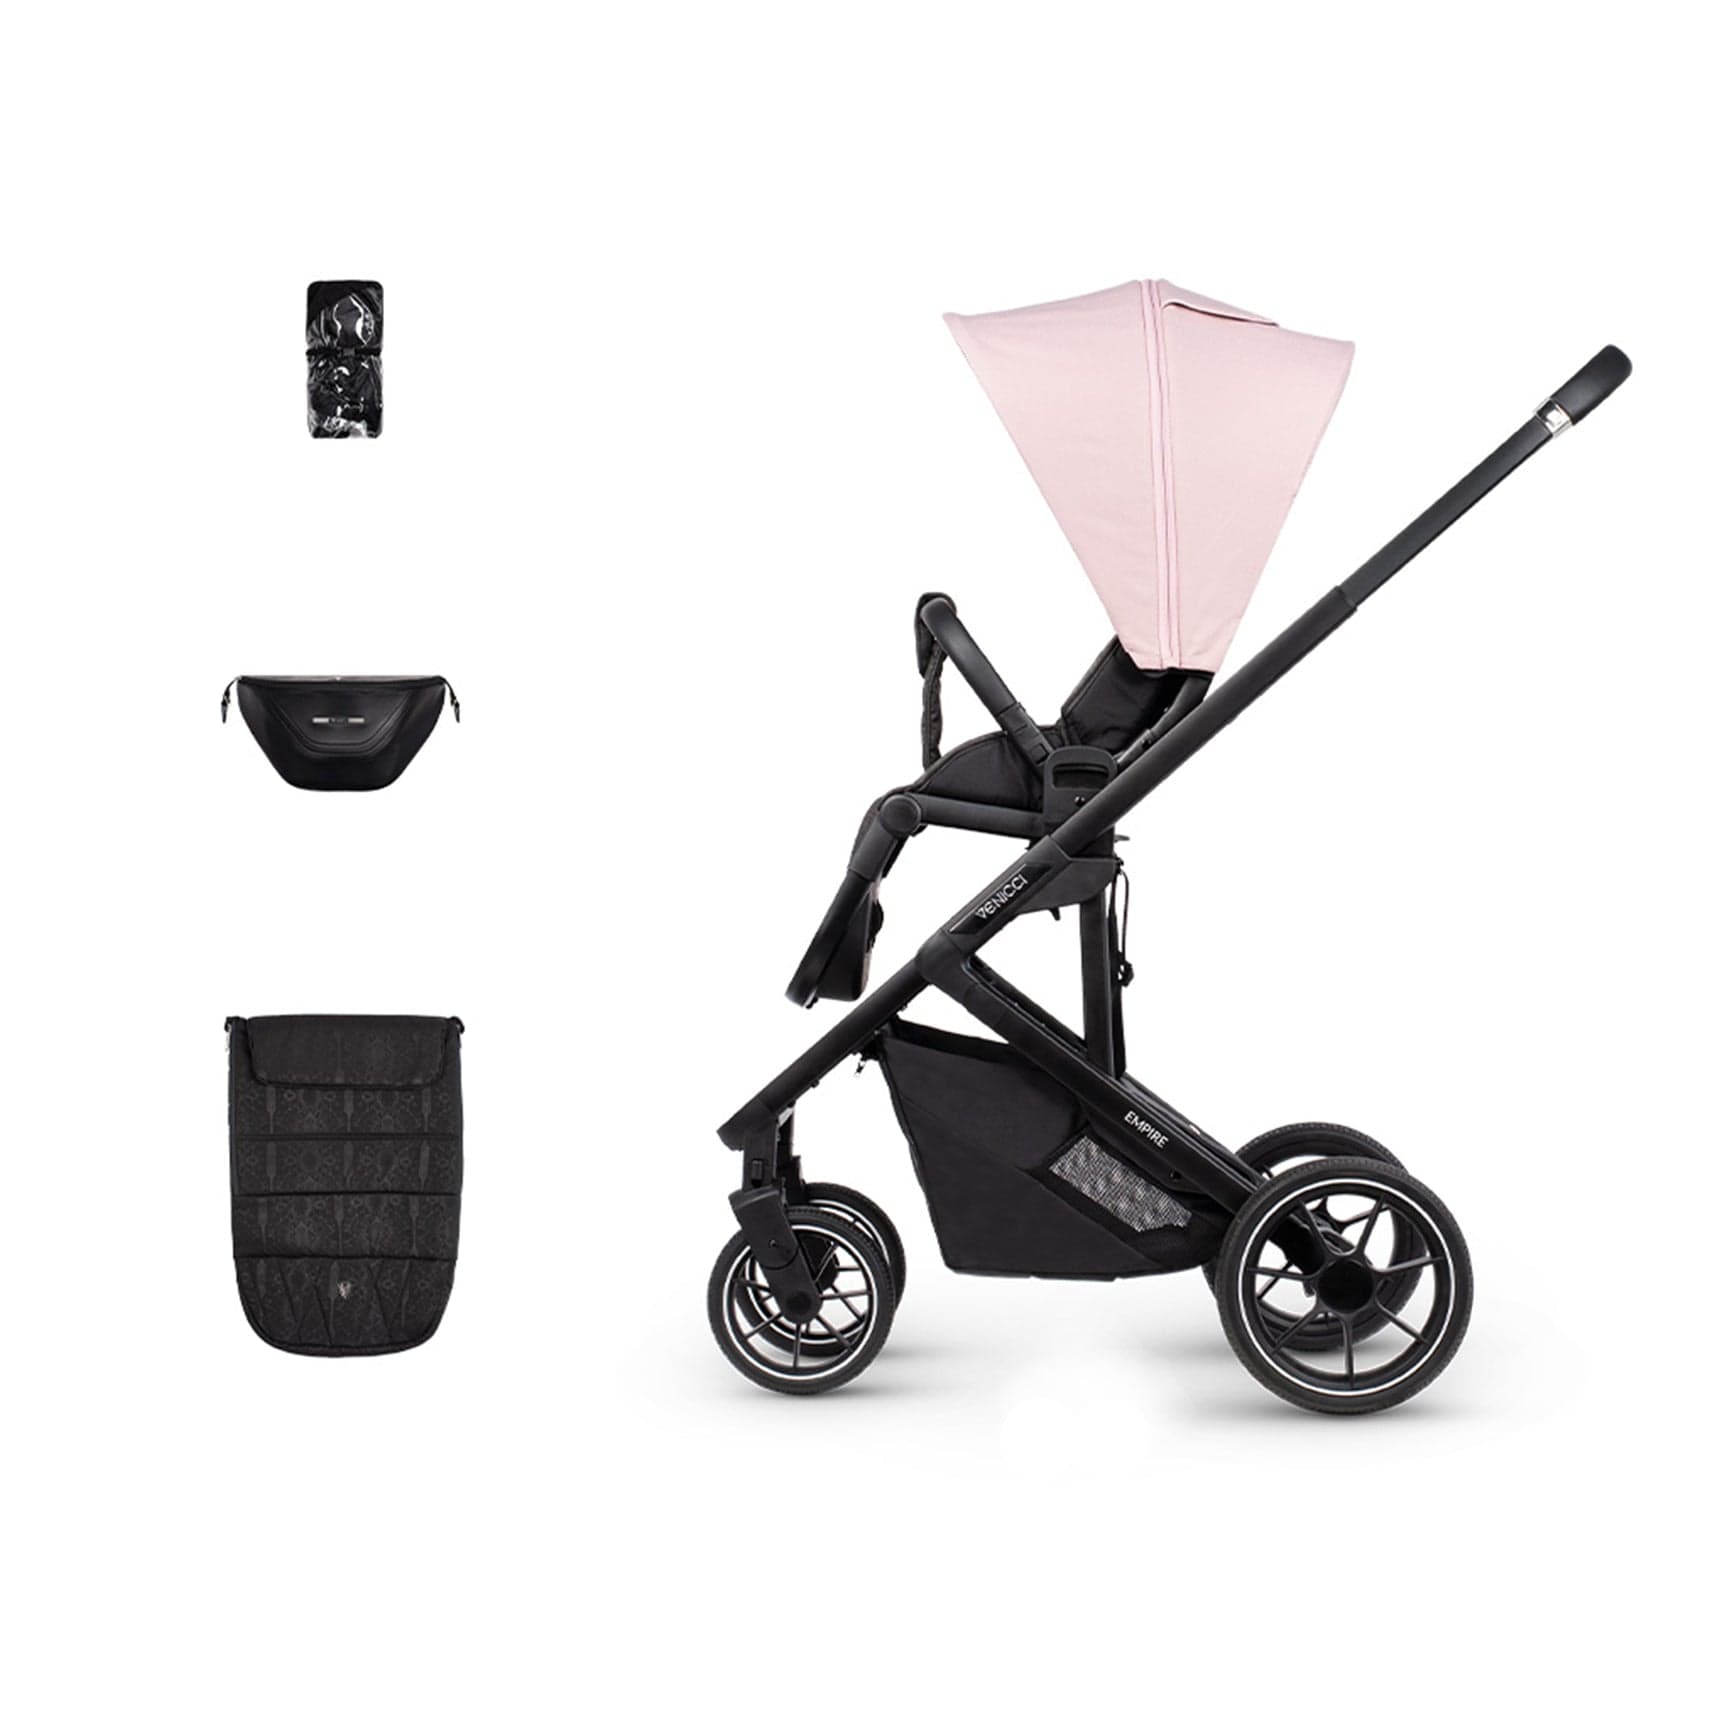 Venicci Empire Stroller & Accessory Pack in Silk Pink Pushchairs & Buggies 1000700108 5905261331175